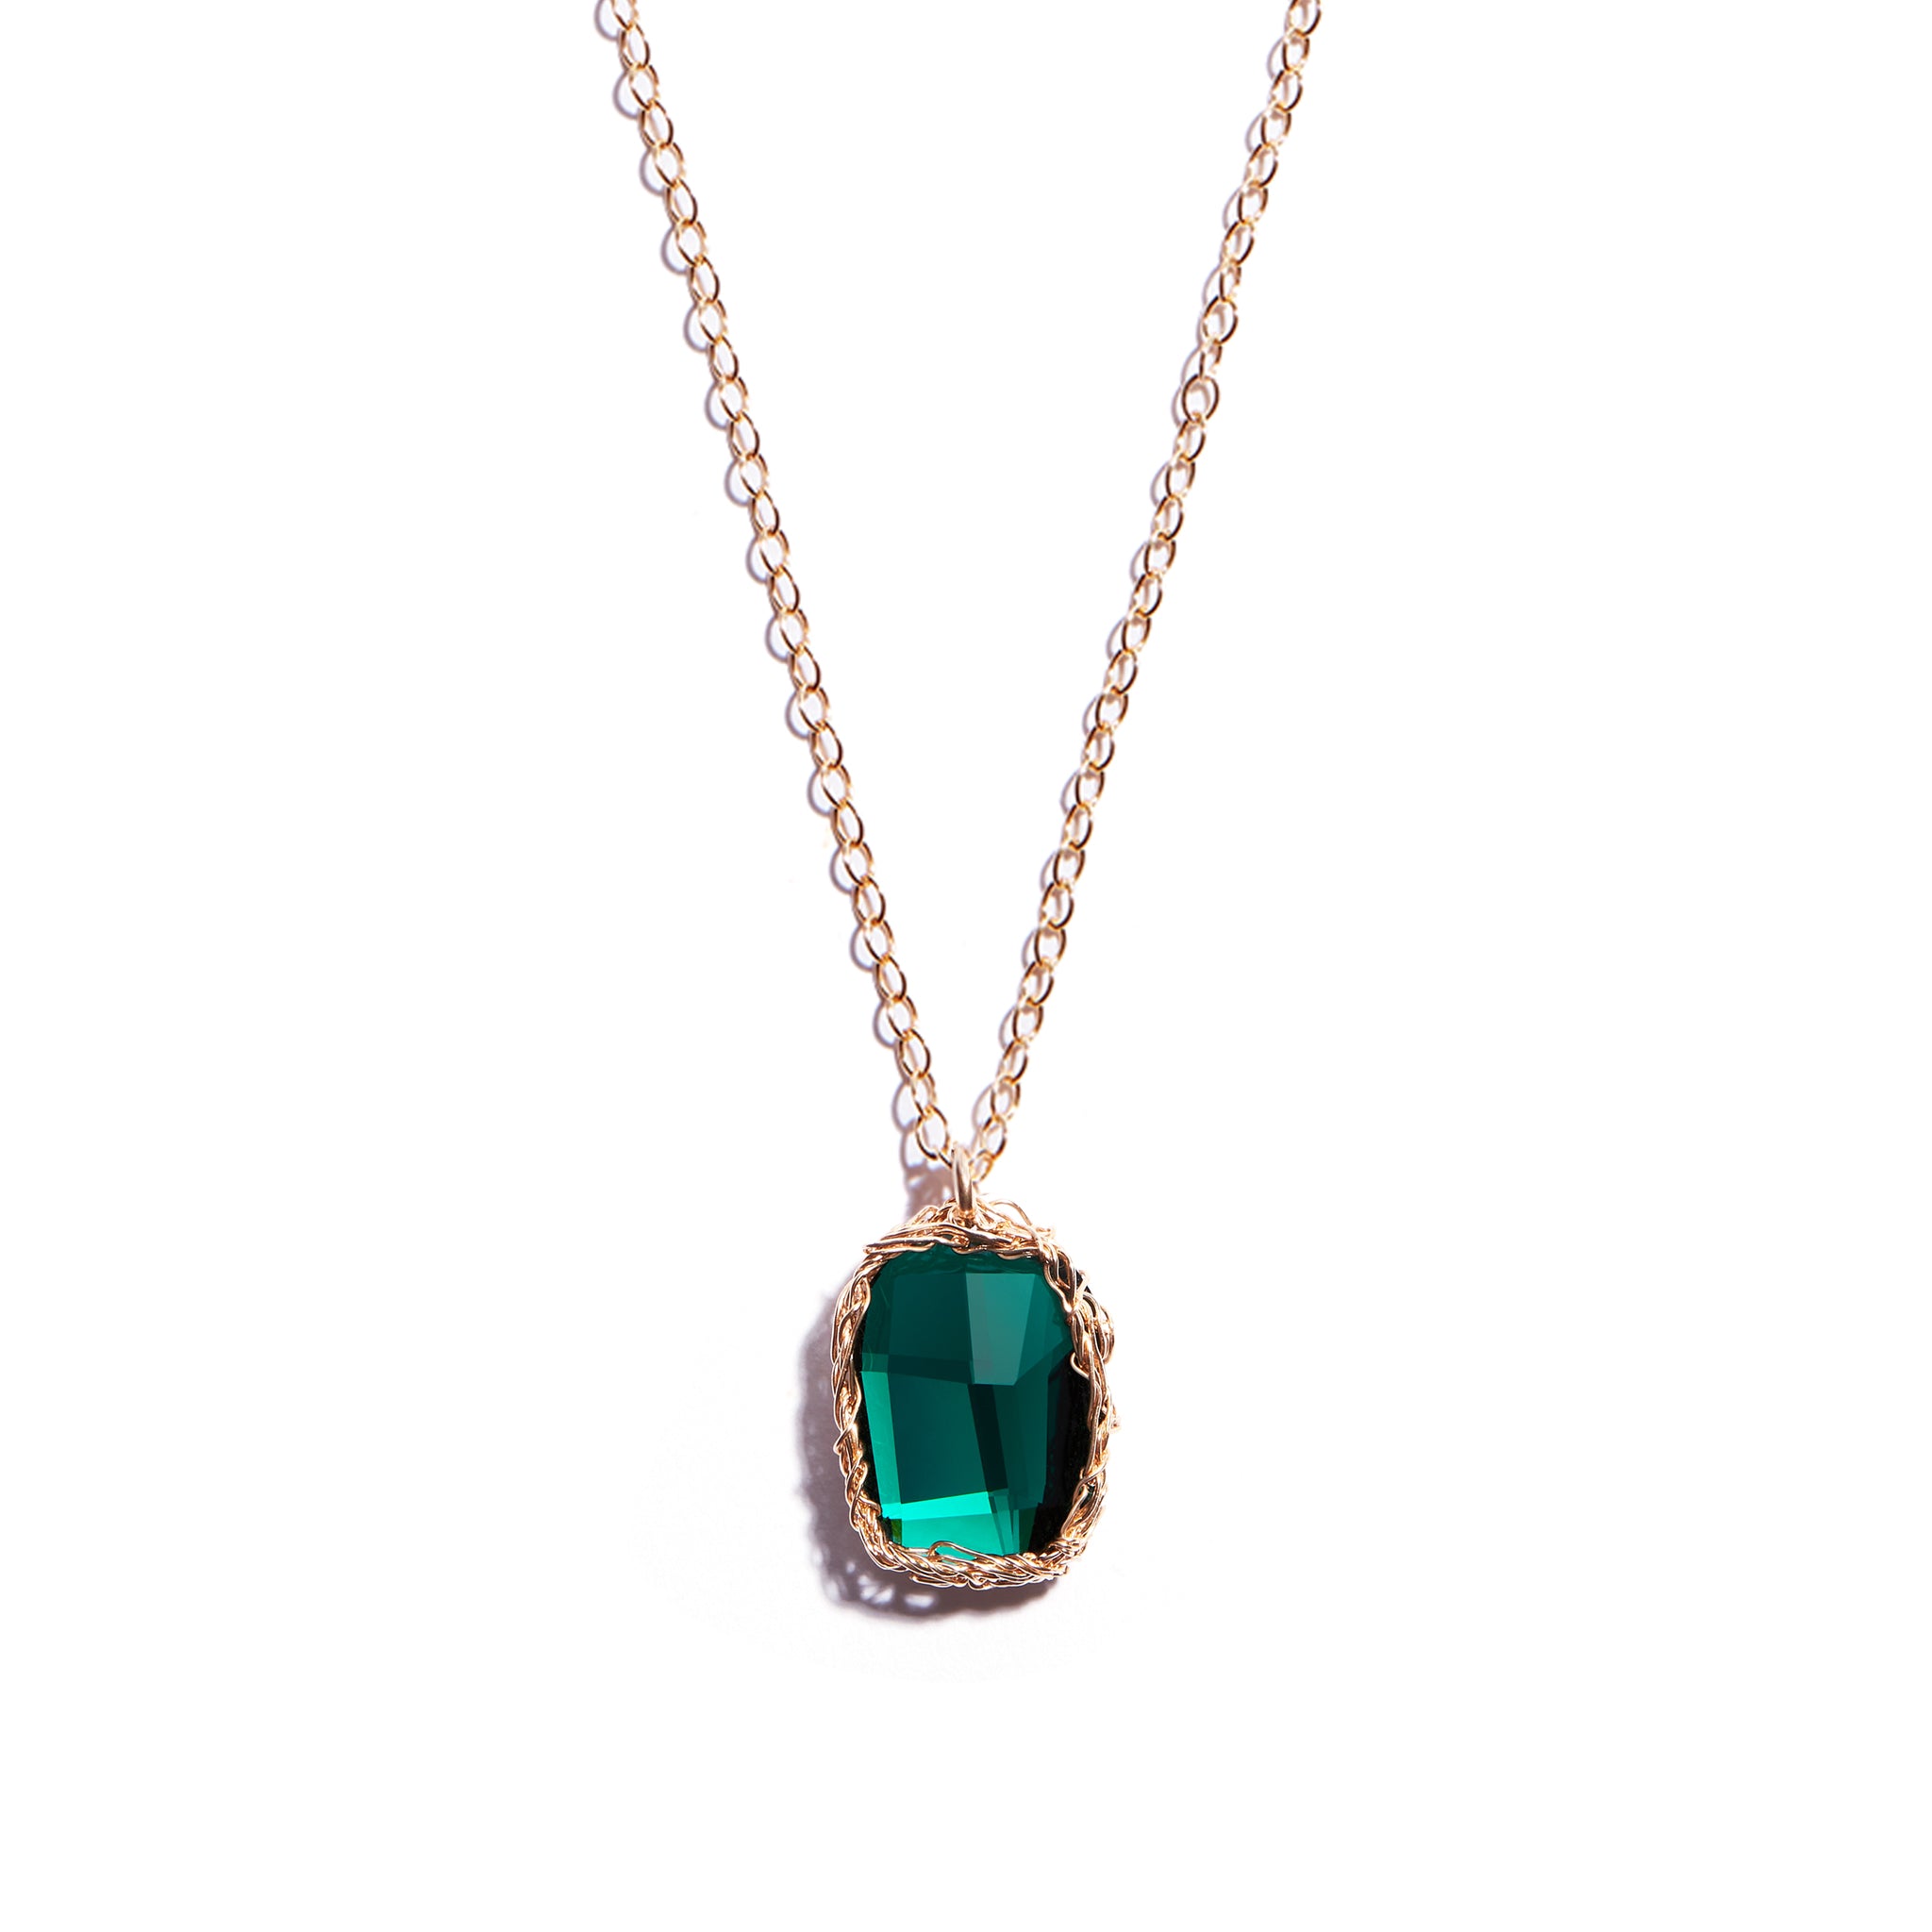 Vibrant emerald green crochet pendant crafted from 14 carat gold-filled metal, adorned with a sparkling swarovski emerald stone. This elegant Seoidin classic pendant is a stunning addition to any outfit and makes the perfect gift for someone special.